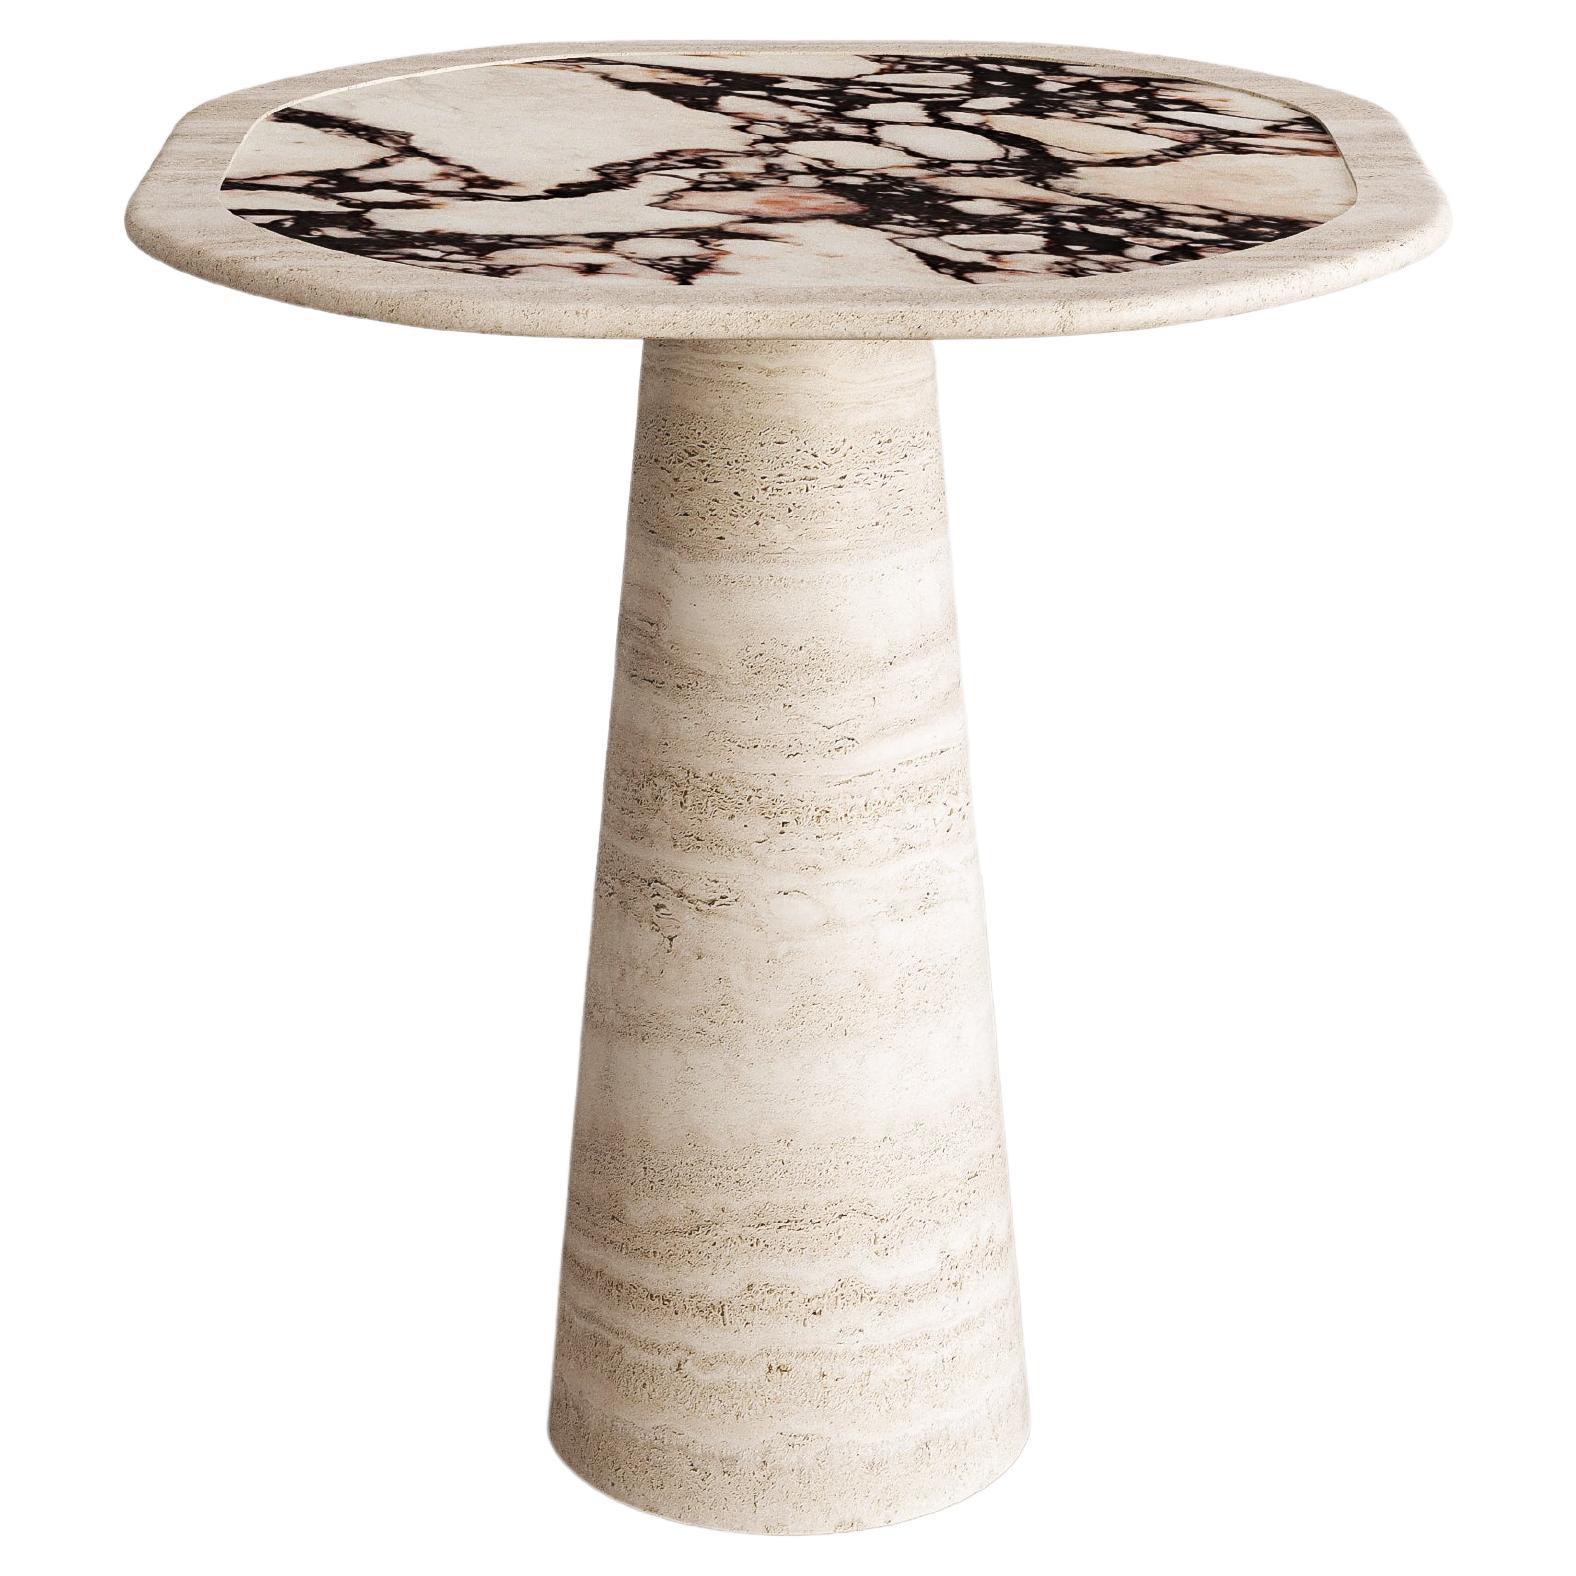 Eros Foyer Table in Italian Bianco Travertine with a Viola Heart For Sale